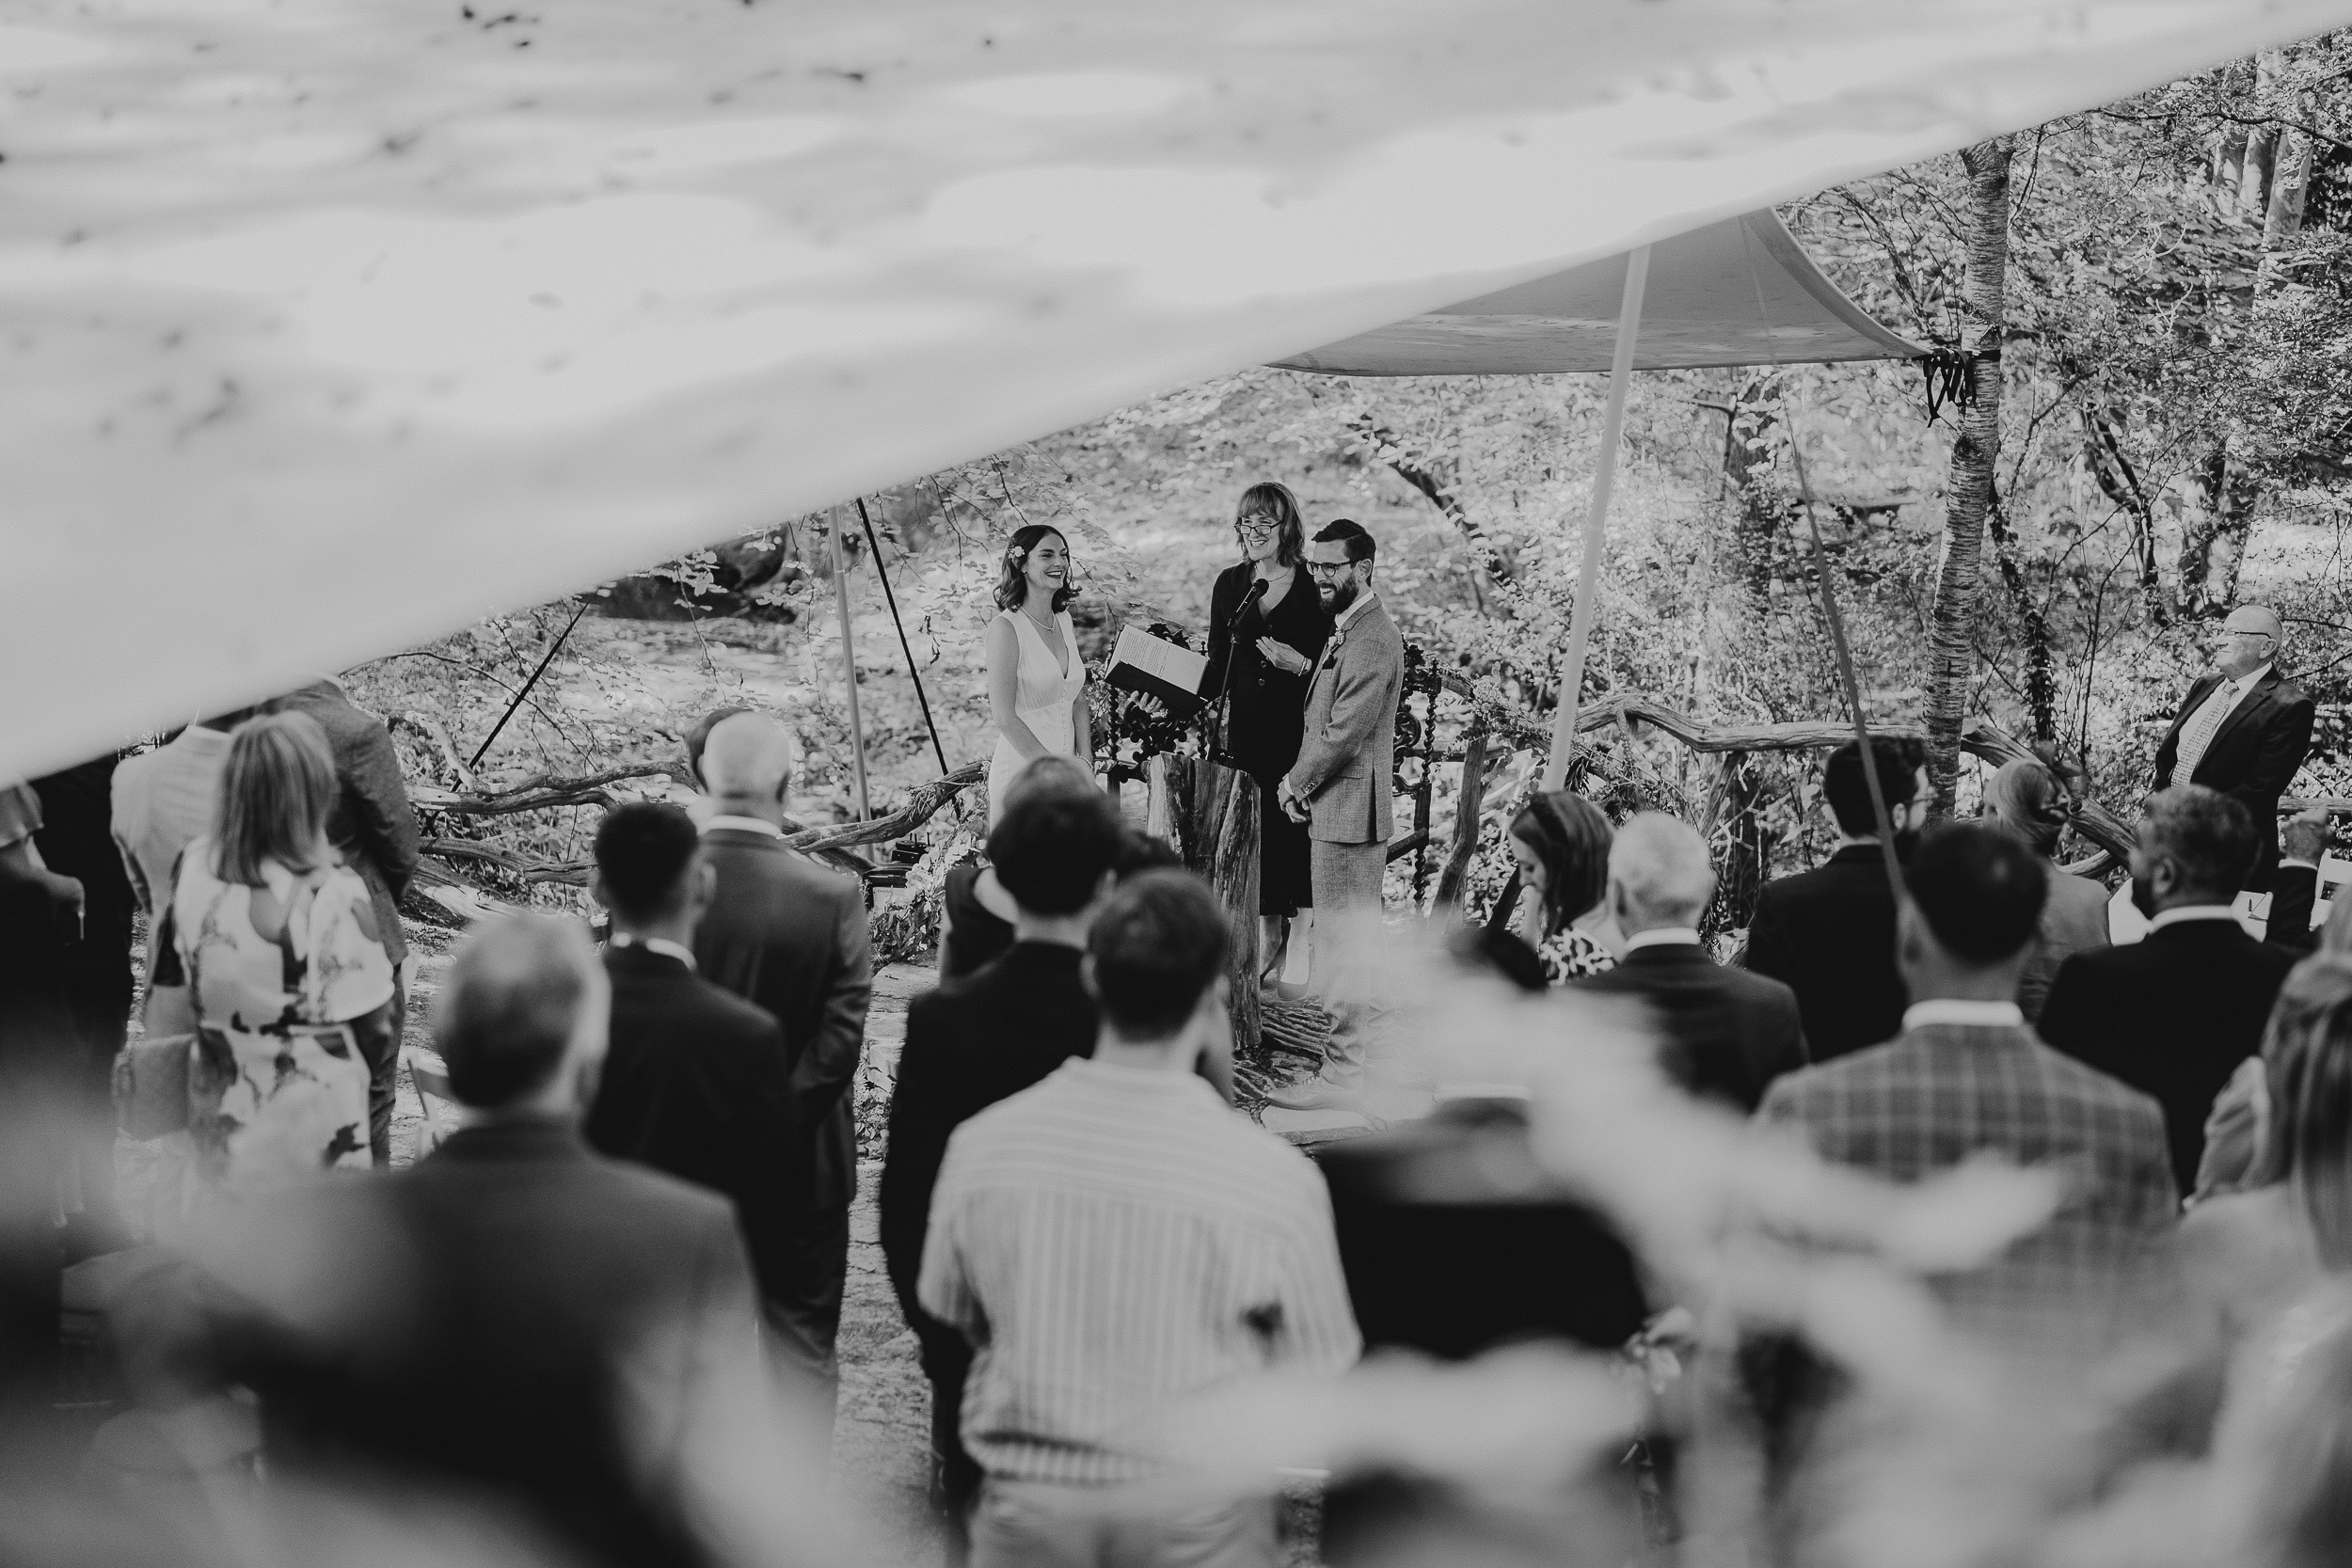 A Surrey Wedding ceremony in the woods at Ridge Farm, captured beautifully in a black and white photo.